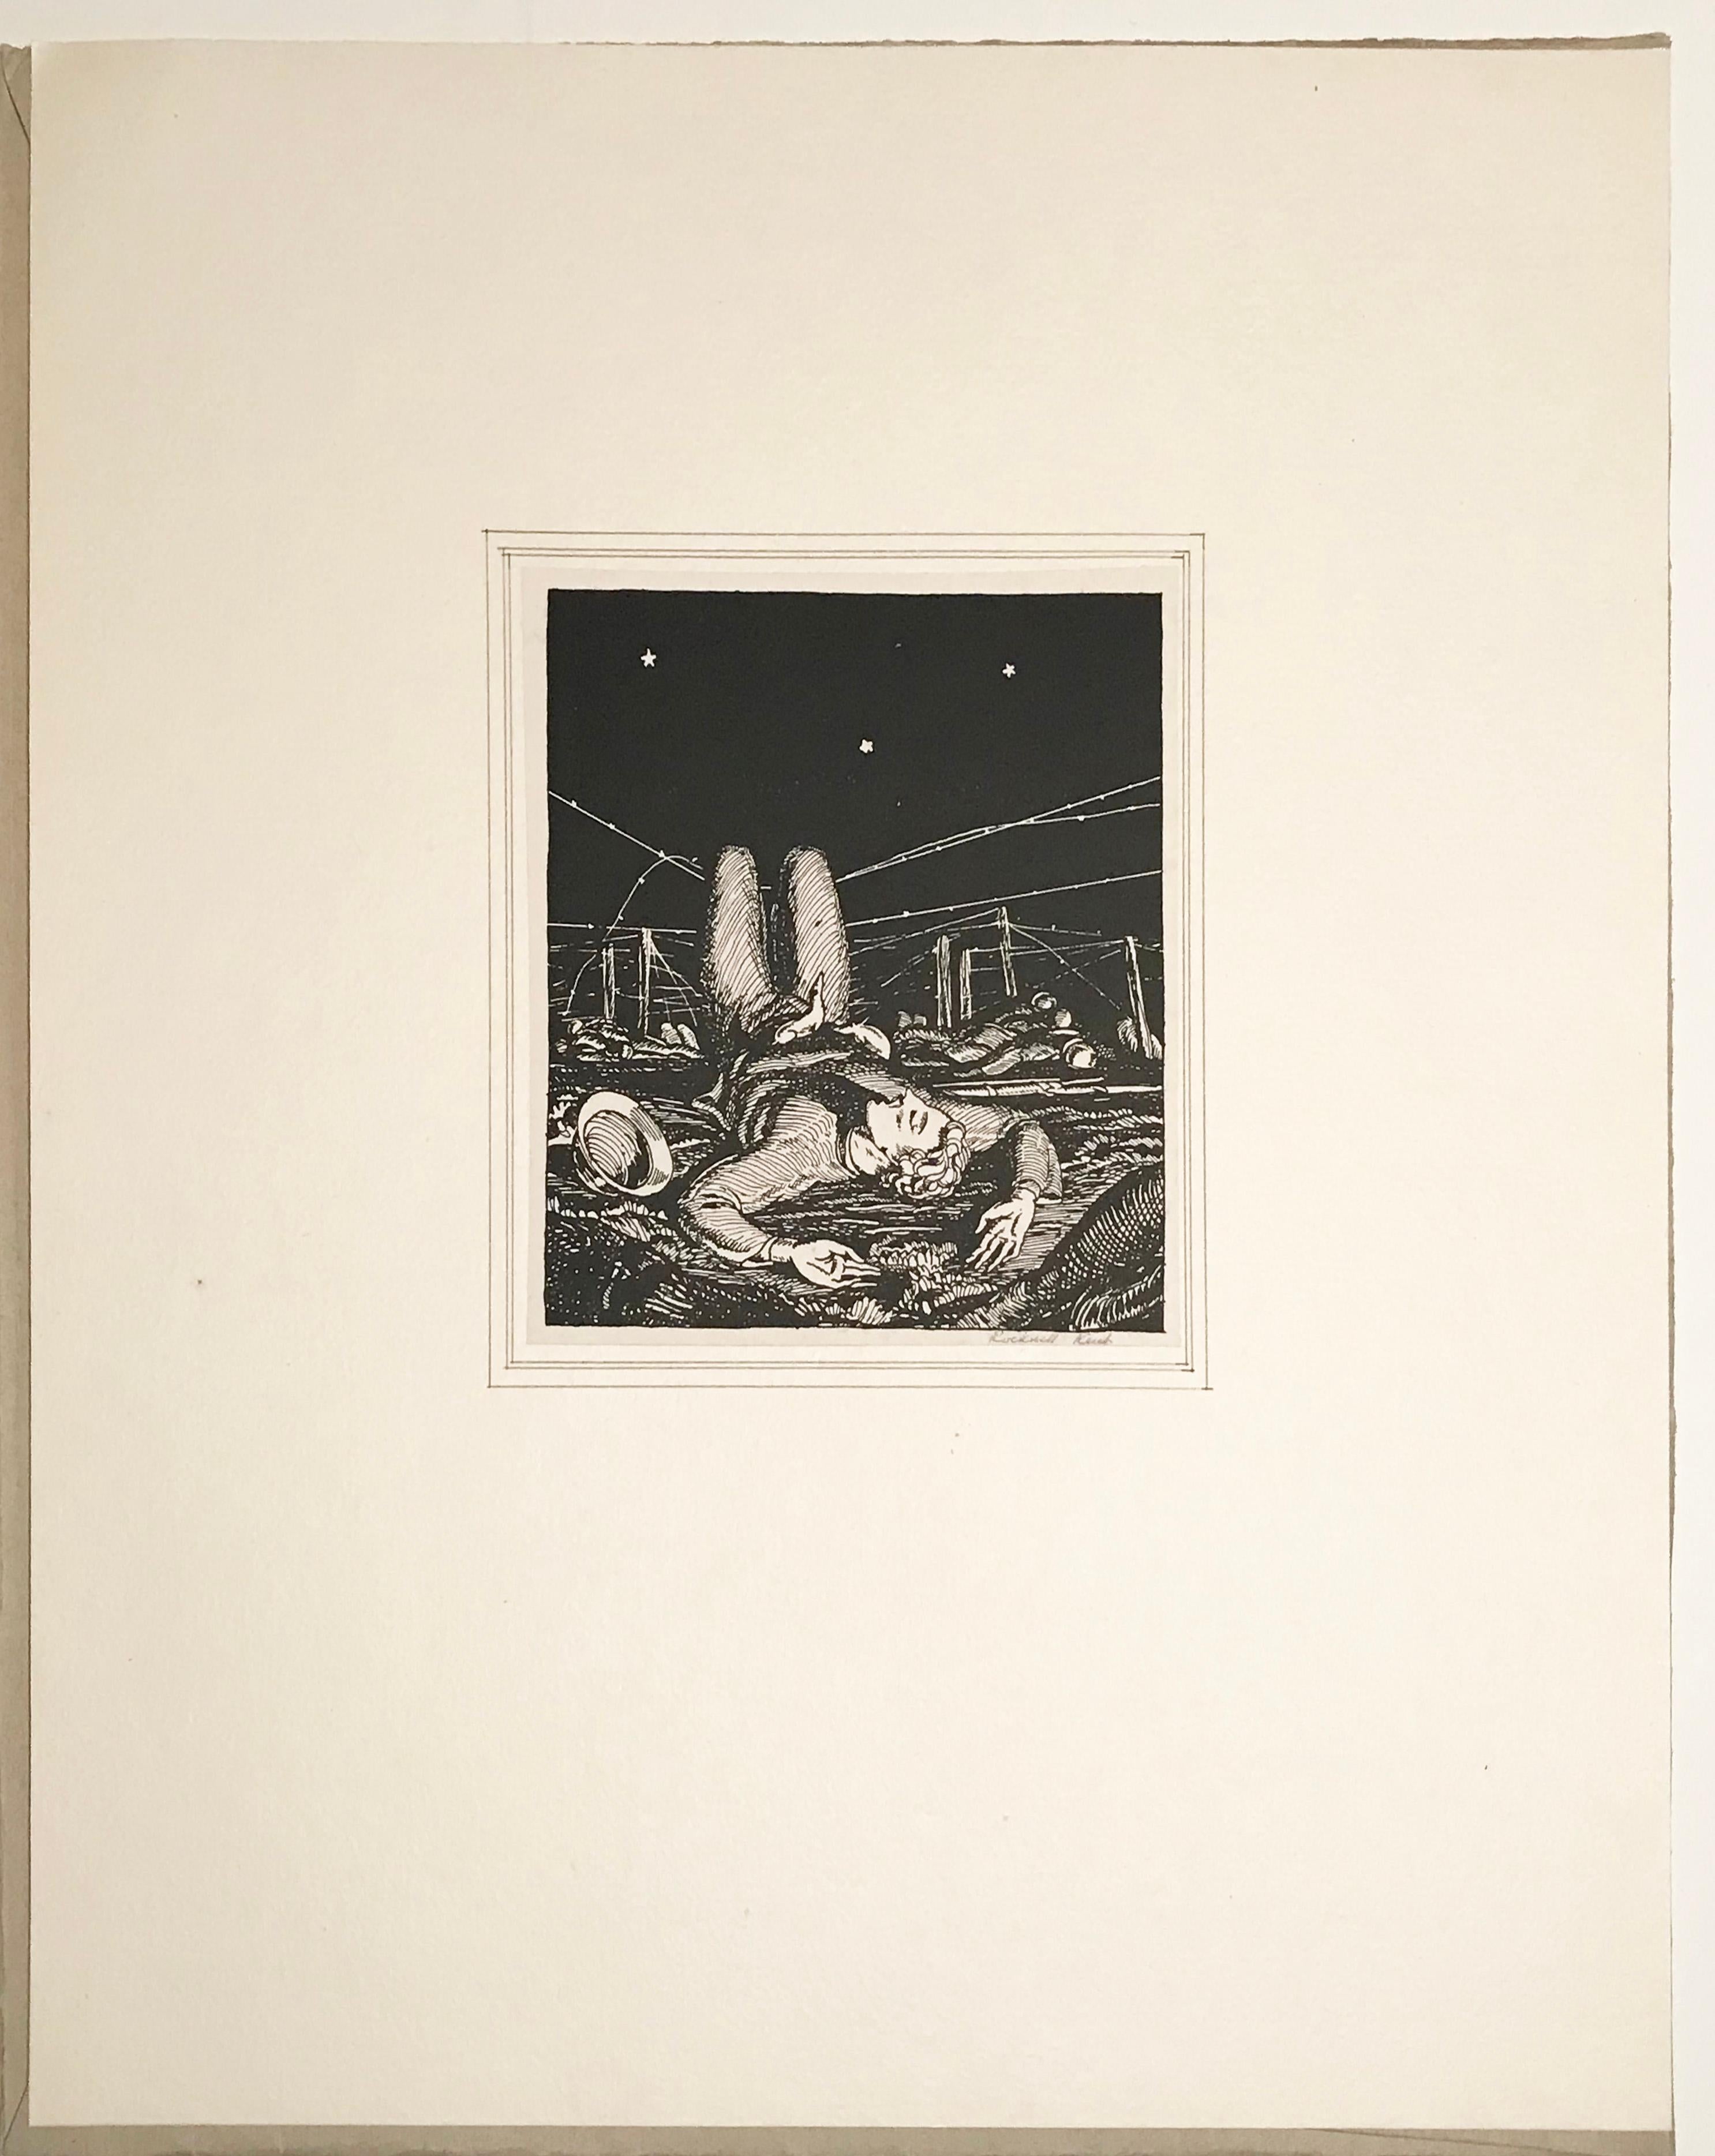 The Seven Ages of Man - American Modern Print by Rockwell Kent